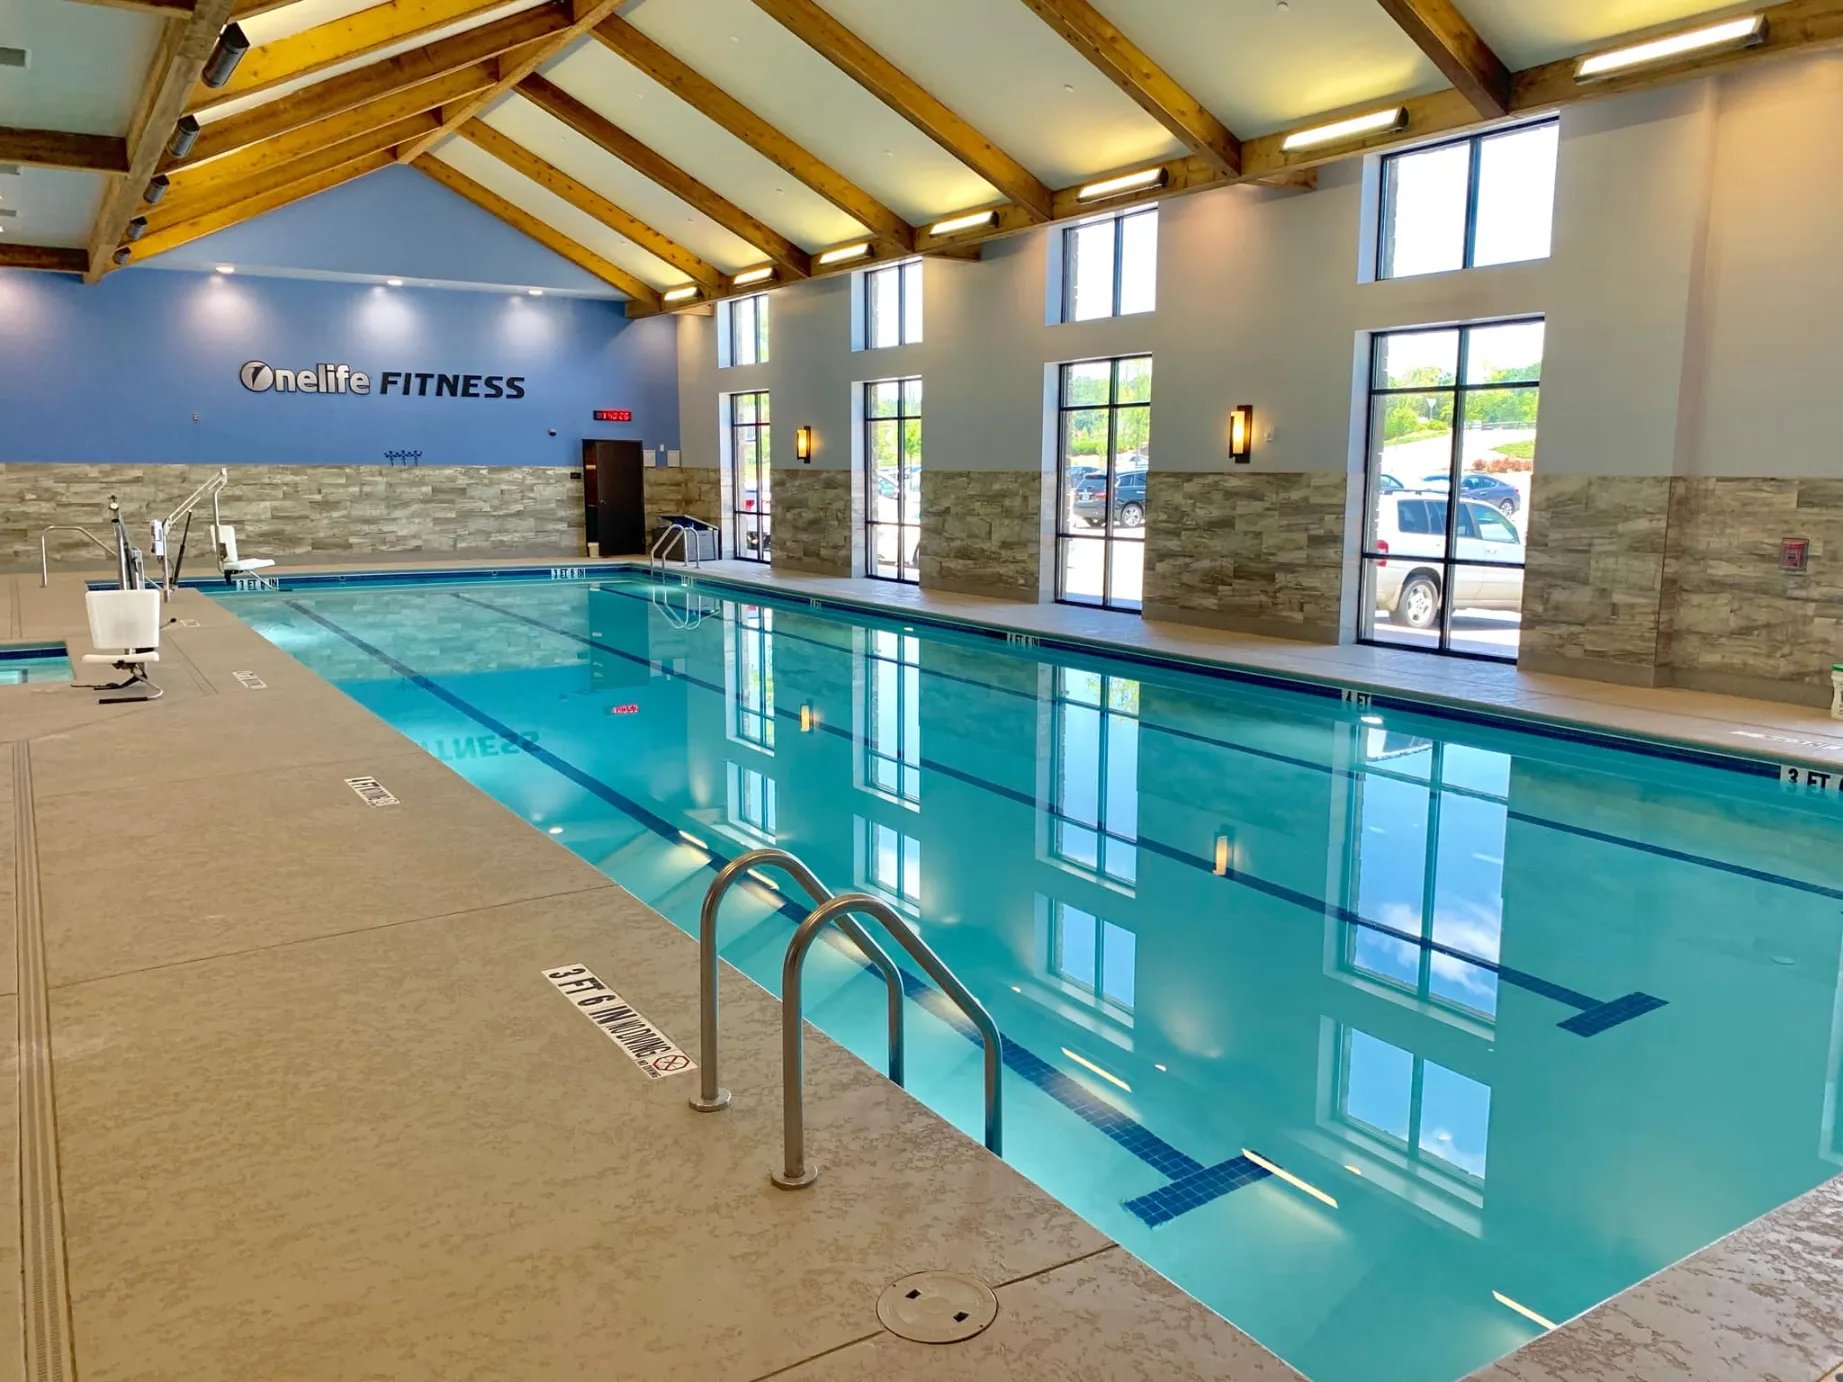 Swimming Pool & Basketball Court The Ideal Environment for Team Building